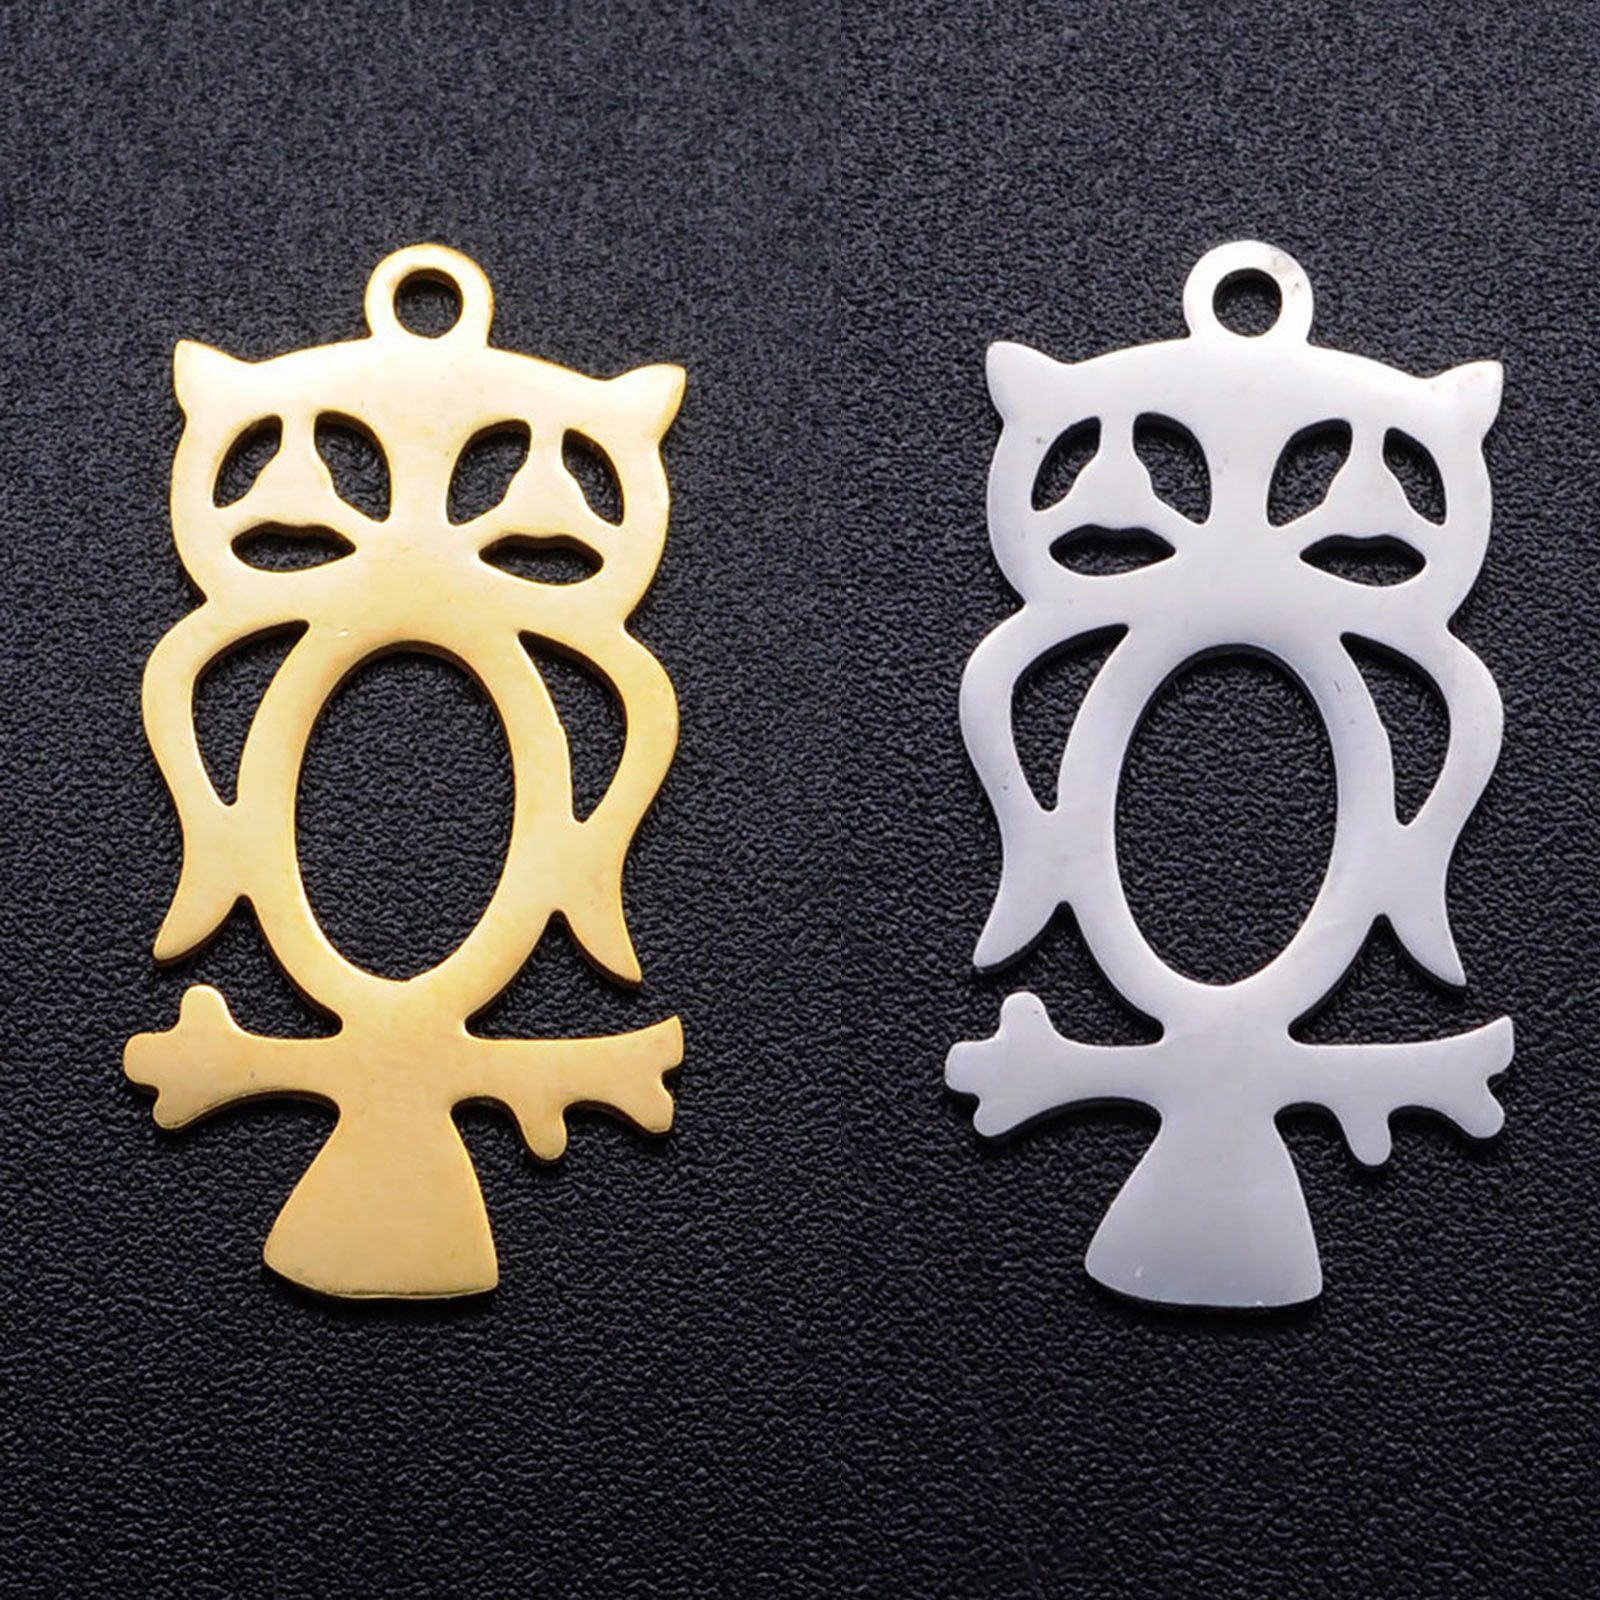 Stainless Steel Halloween Charms Multicolor Owl Animal Geometric Hollow 23mm x 12mm, 5 PCs の画像